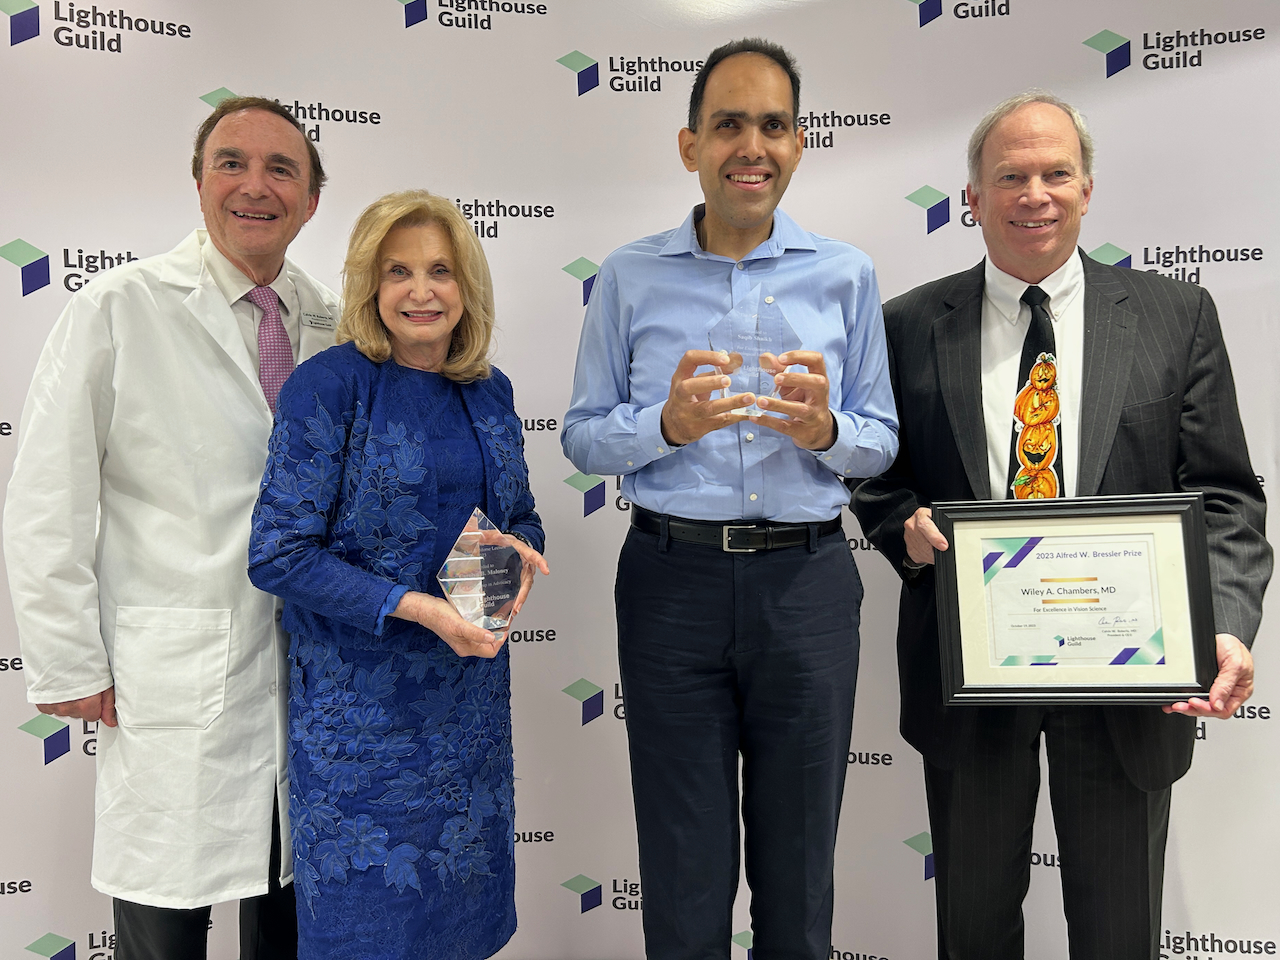 Lighthouse Guild Presents 2023 Awards for Outstanding Accomplishments in Vision Science, Technological Innovation, and Advocacy for People with Vision Impairment